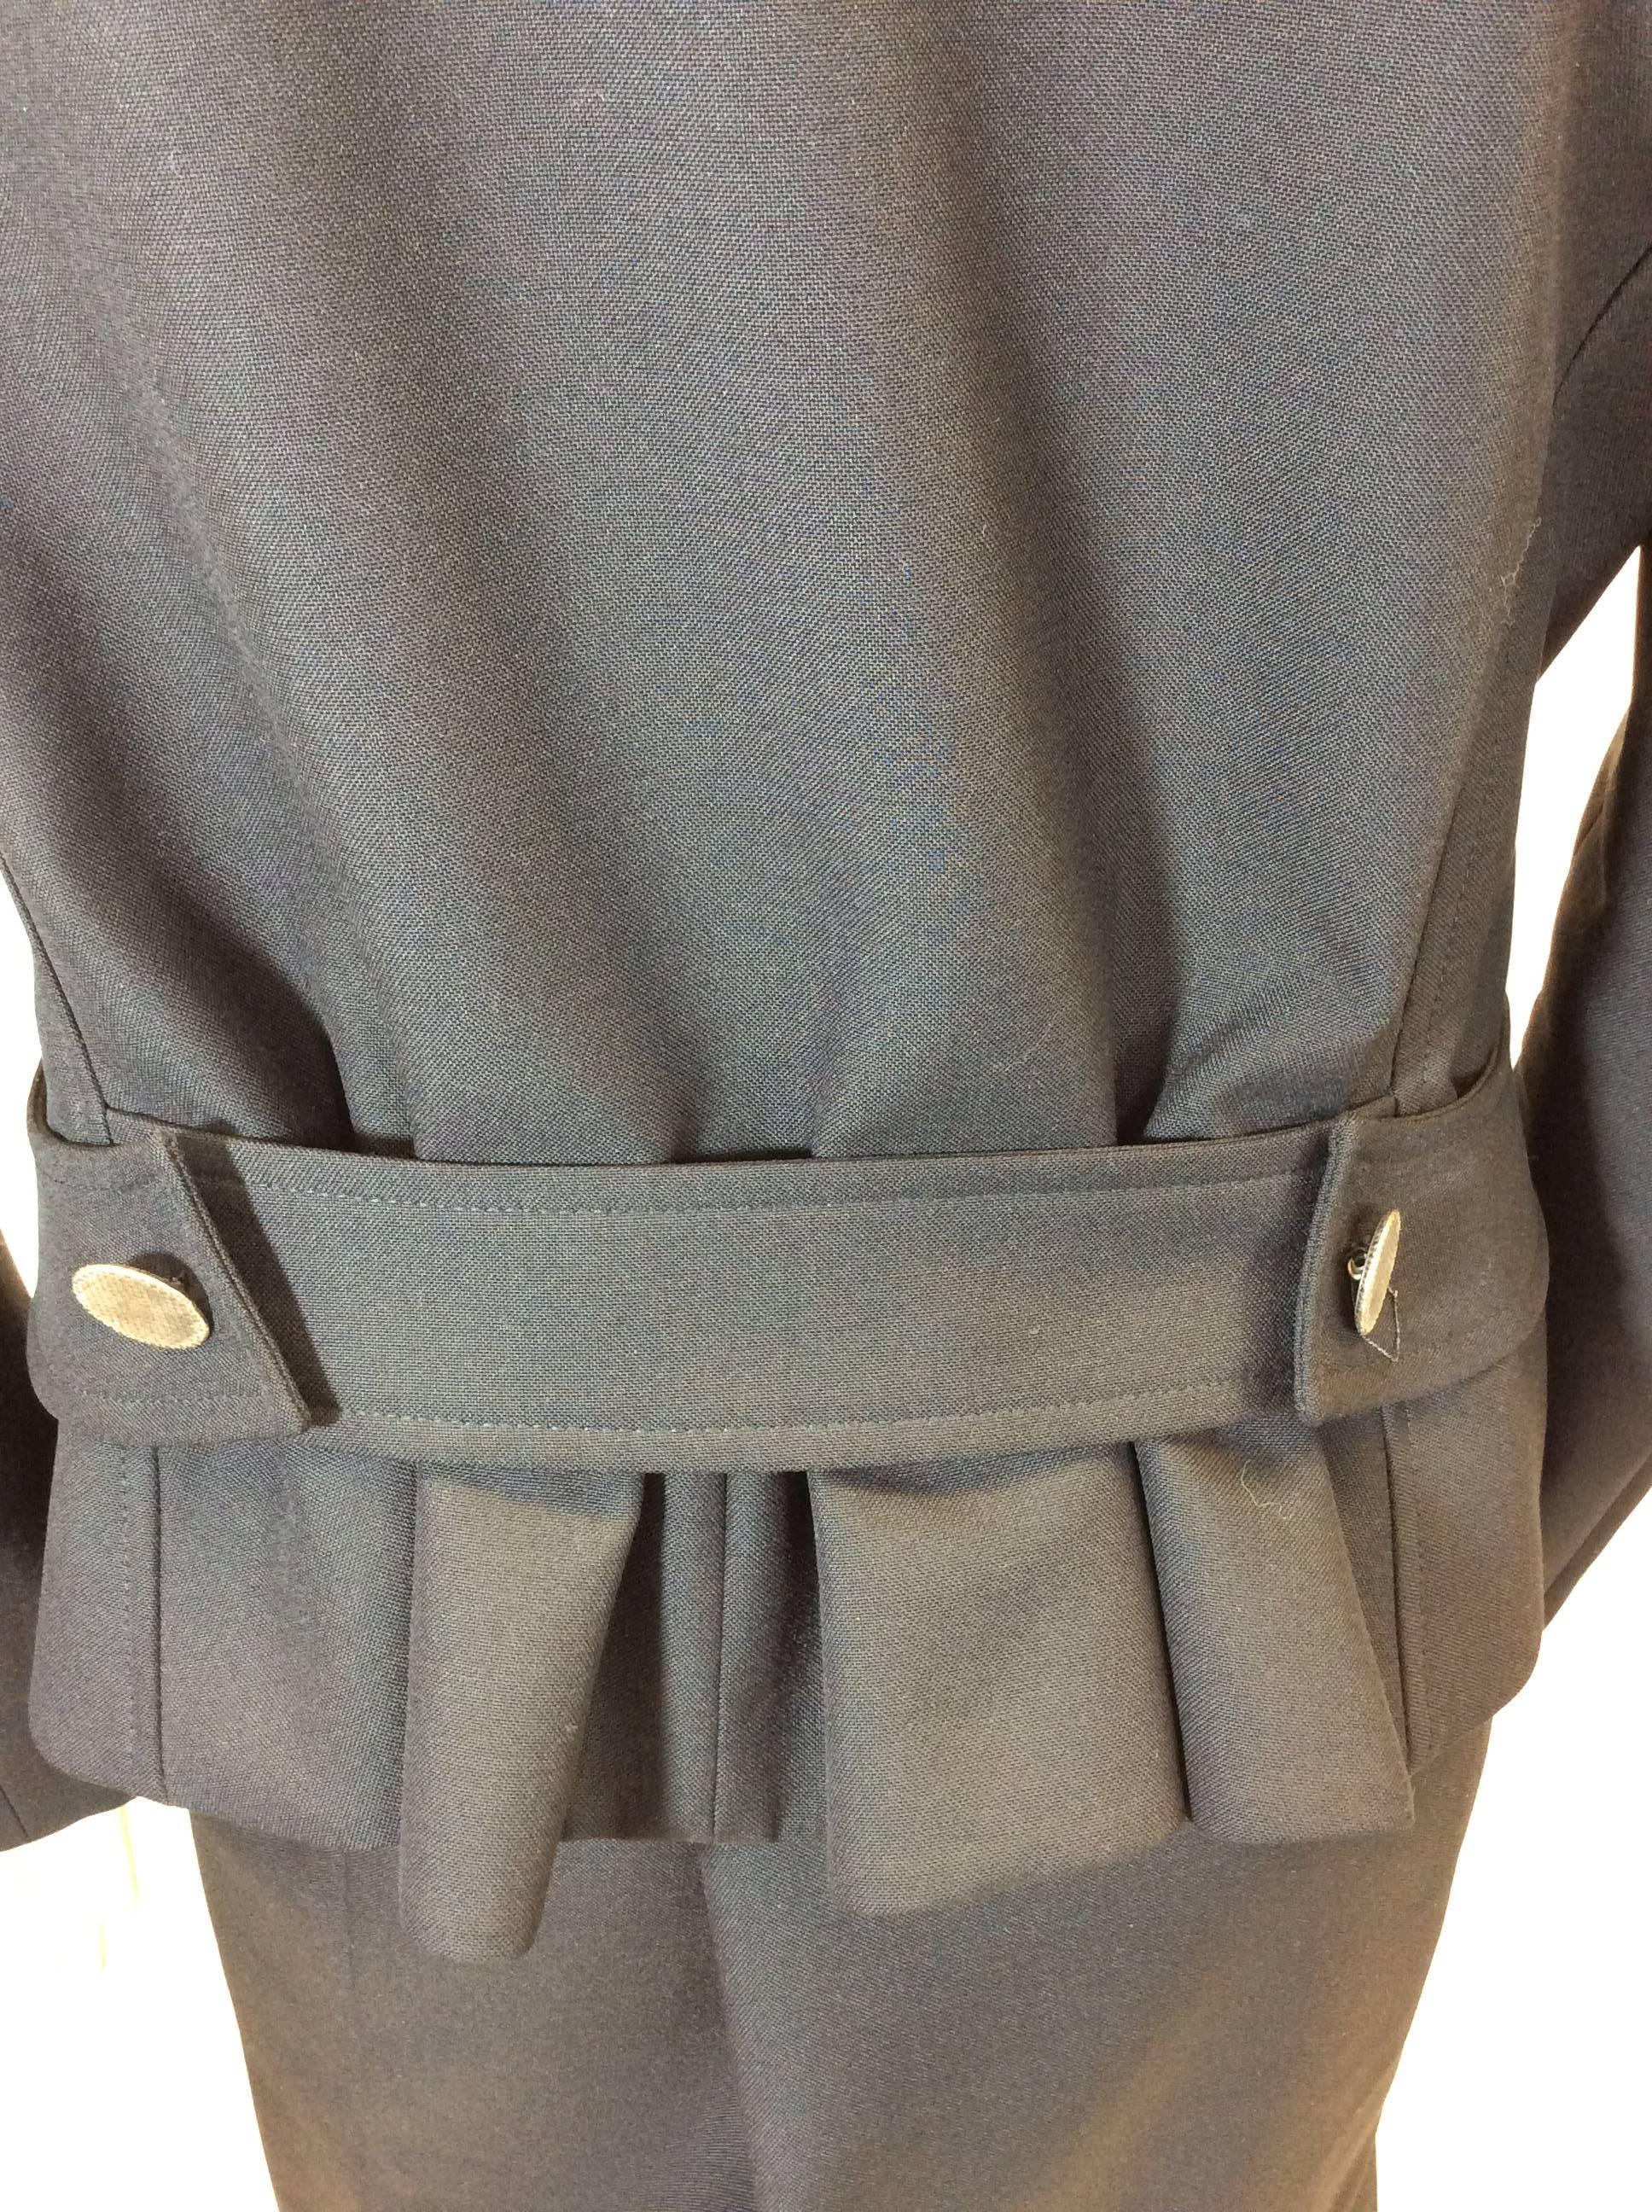 Balenciaga Black Skirt Suit with Peplum Detail For Sale 1